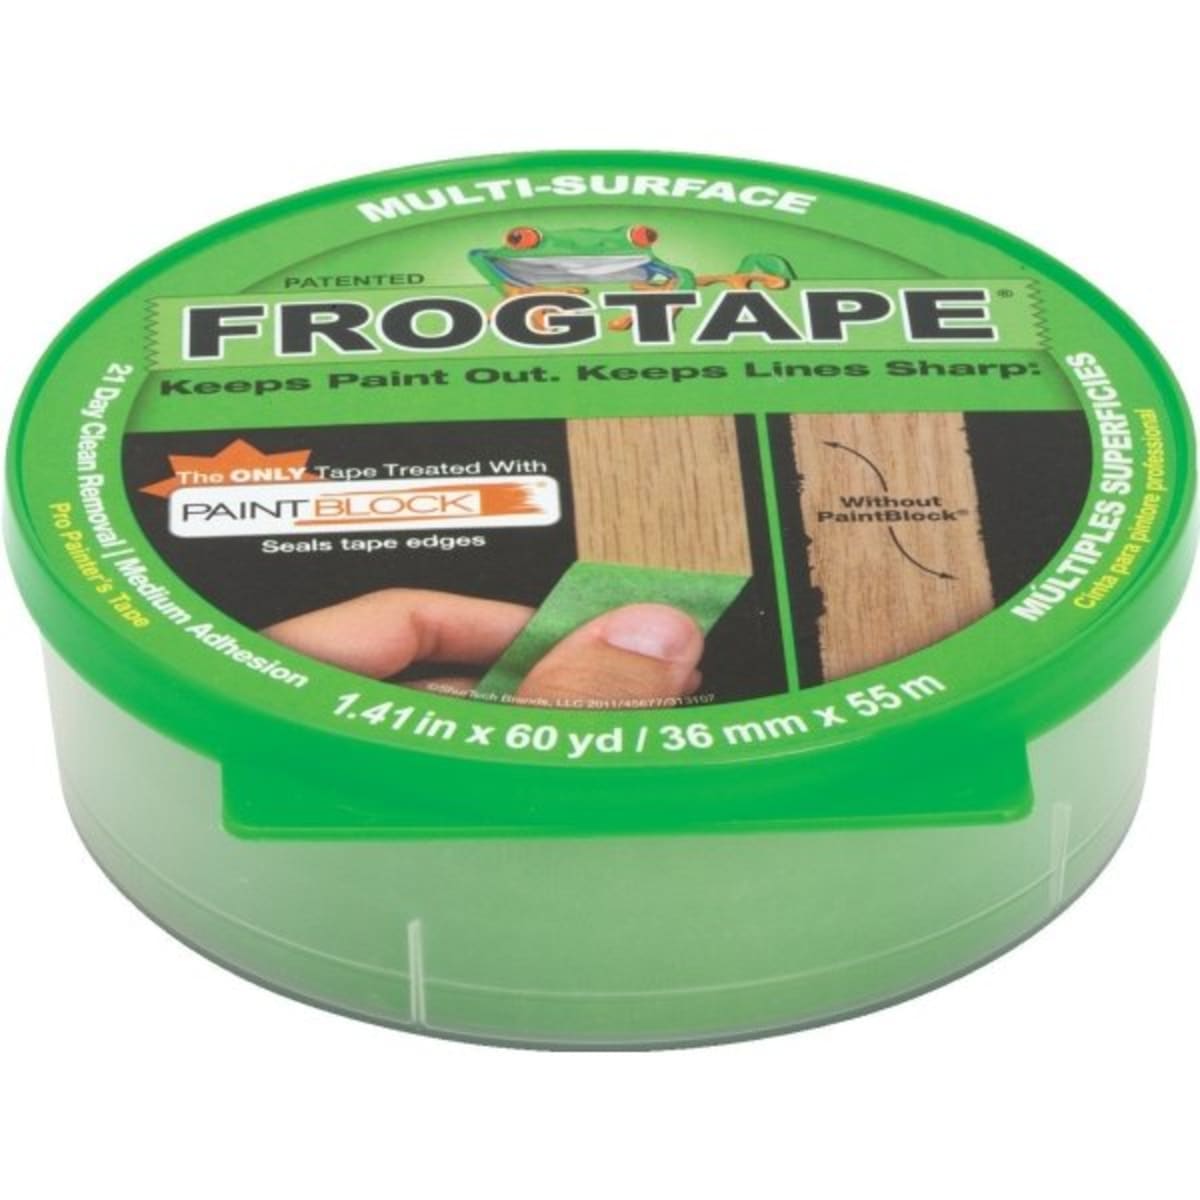 Shurtape CP 150 8-Day Painter's Tape - Multi-Surface - Green - 48mm x 55m - 1 Roll - 103365